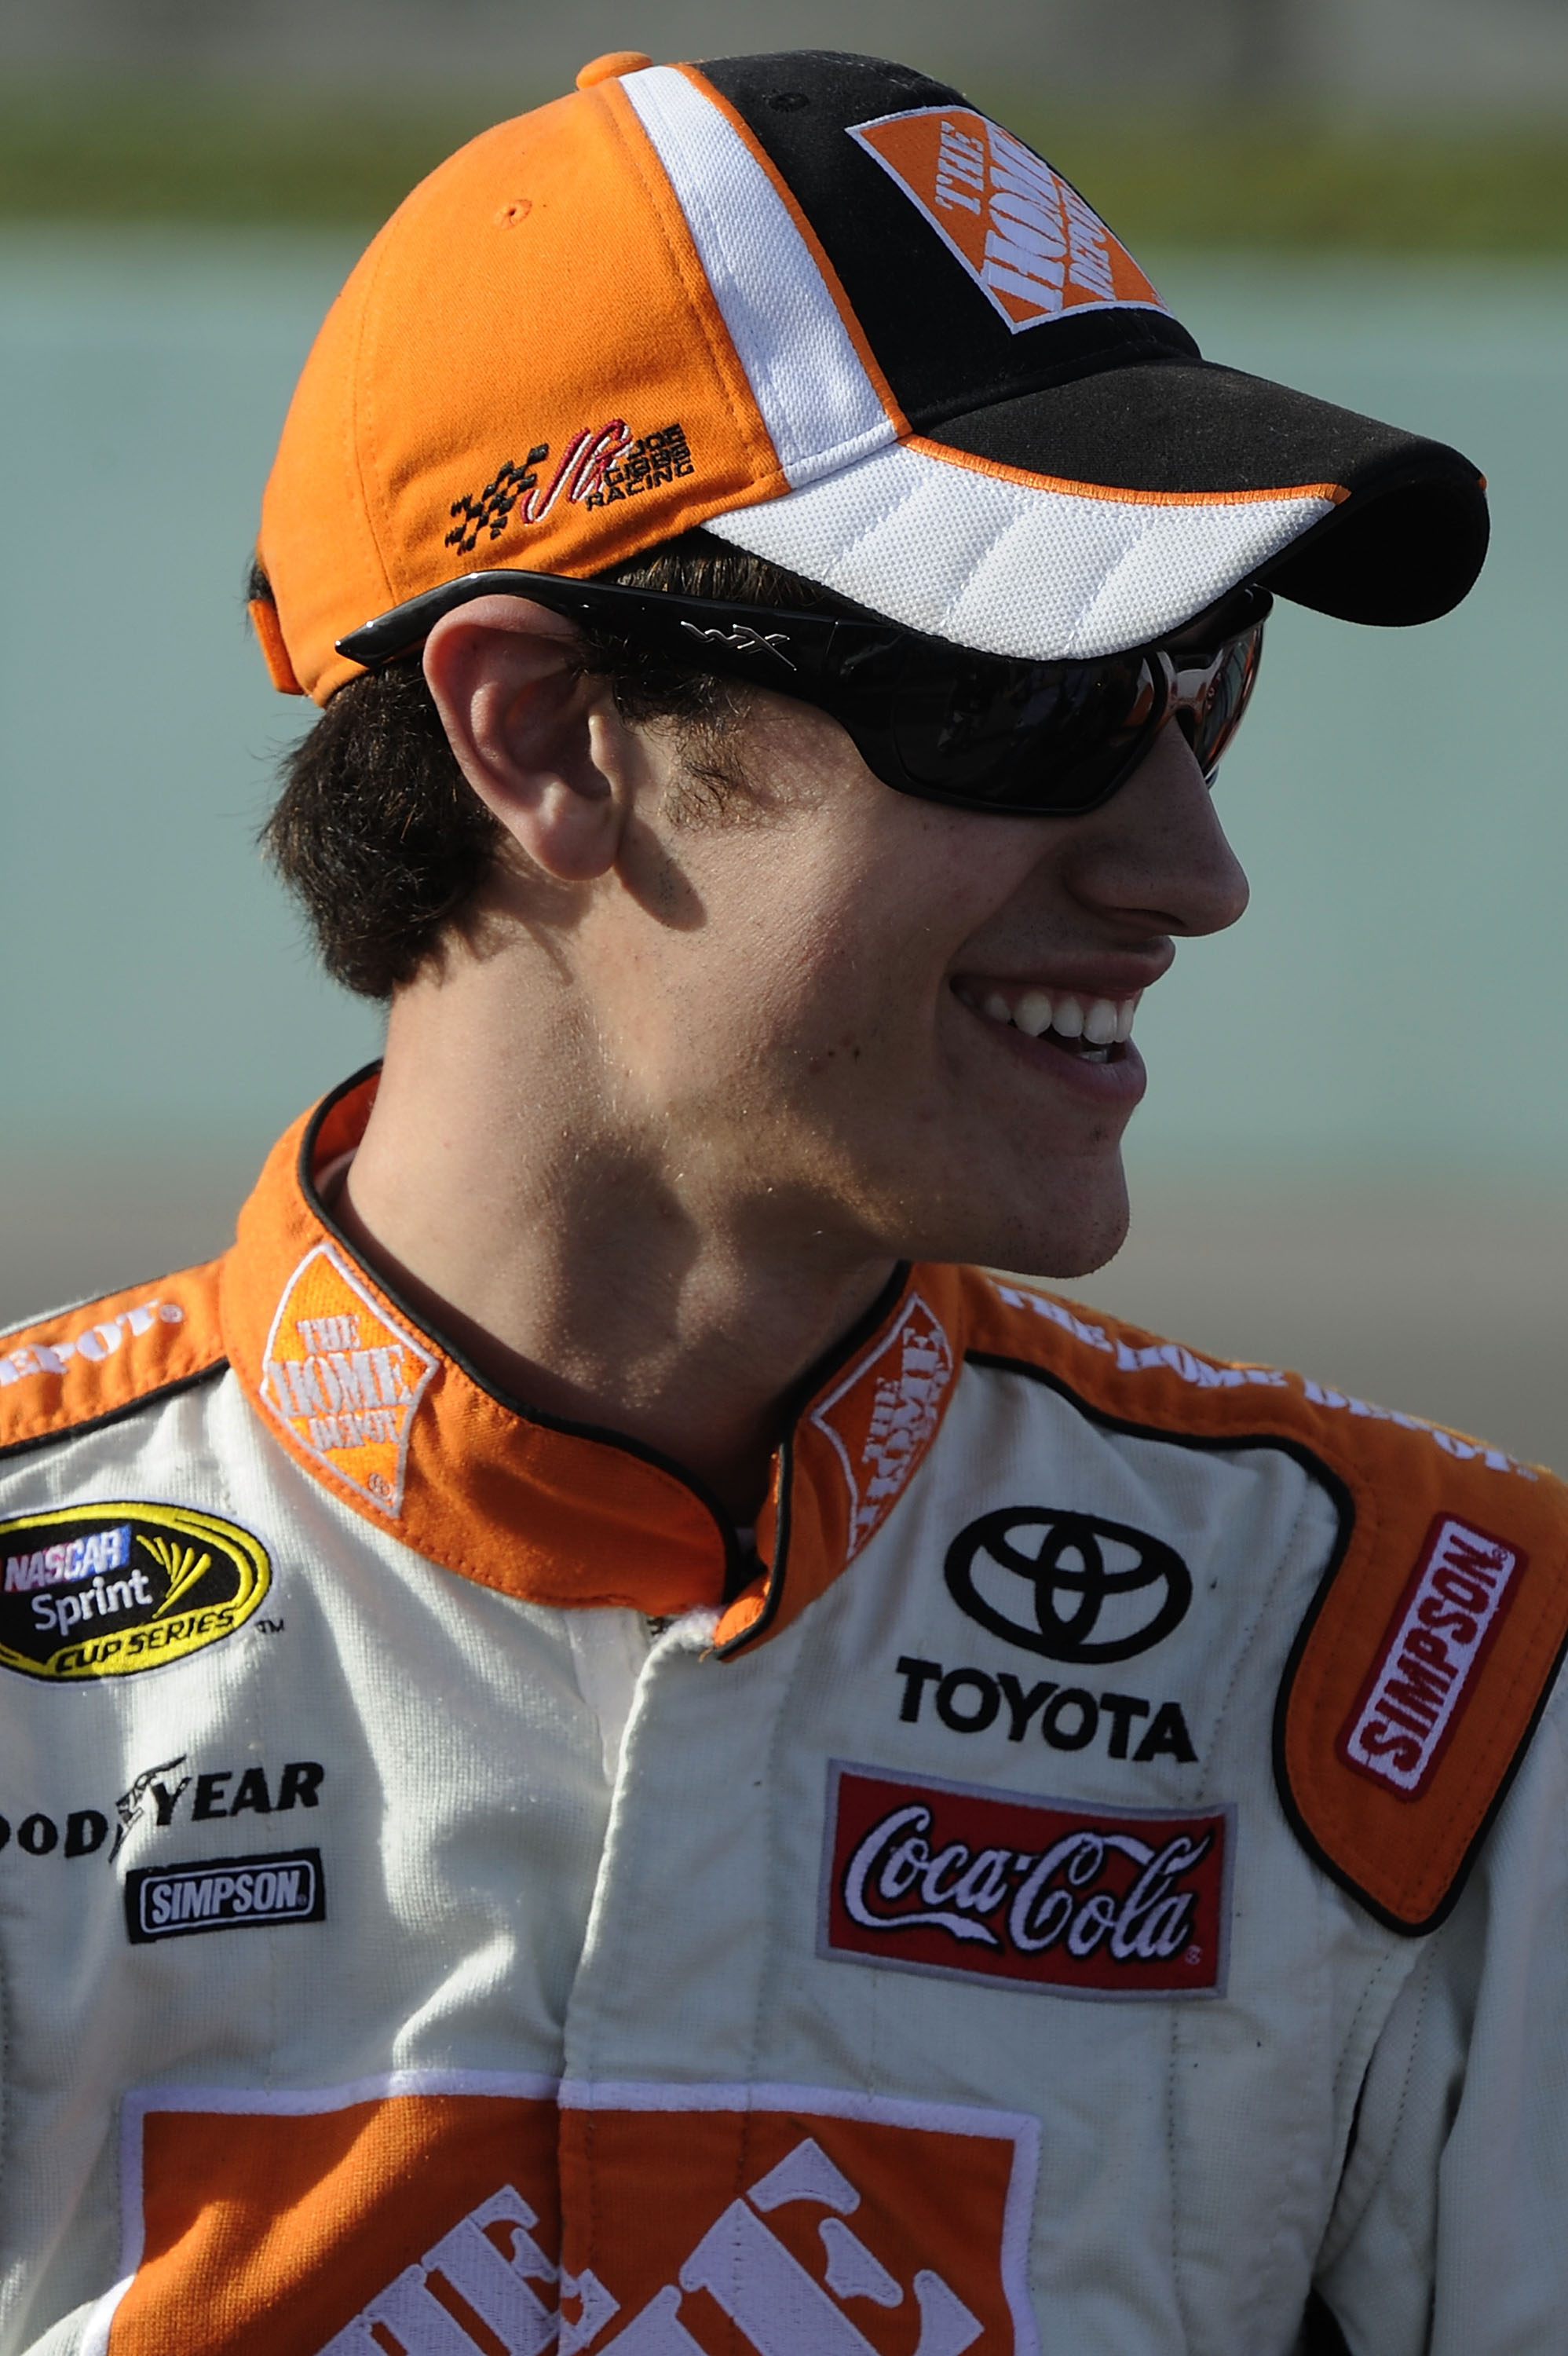 HOMESTEAD, FL - NOVEMBER 19:  Joey Logano, driver of the #20 Home Depot Toyota, walks on the grid during qualifying for the NASCAR Sprint Cup Series Ford 400 at Homestead-Miami Speedway on November 19, 2010 in Homestead, Florida.  (Photo by John Harrelson